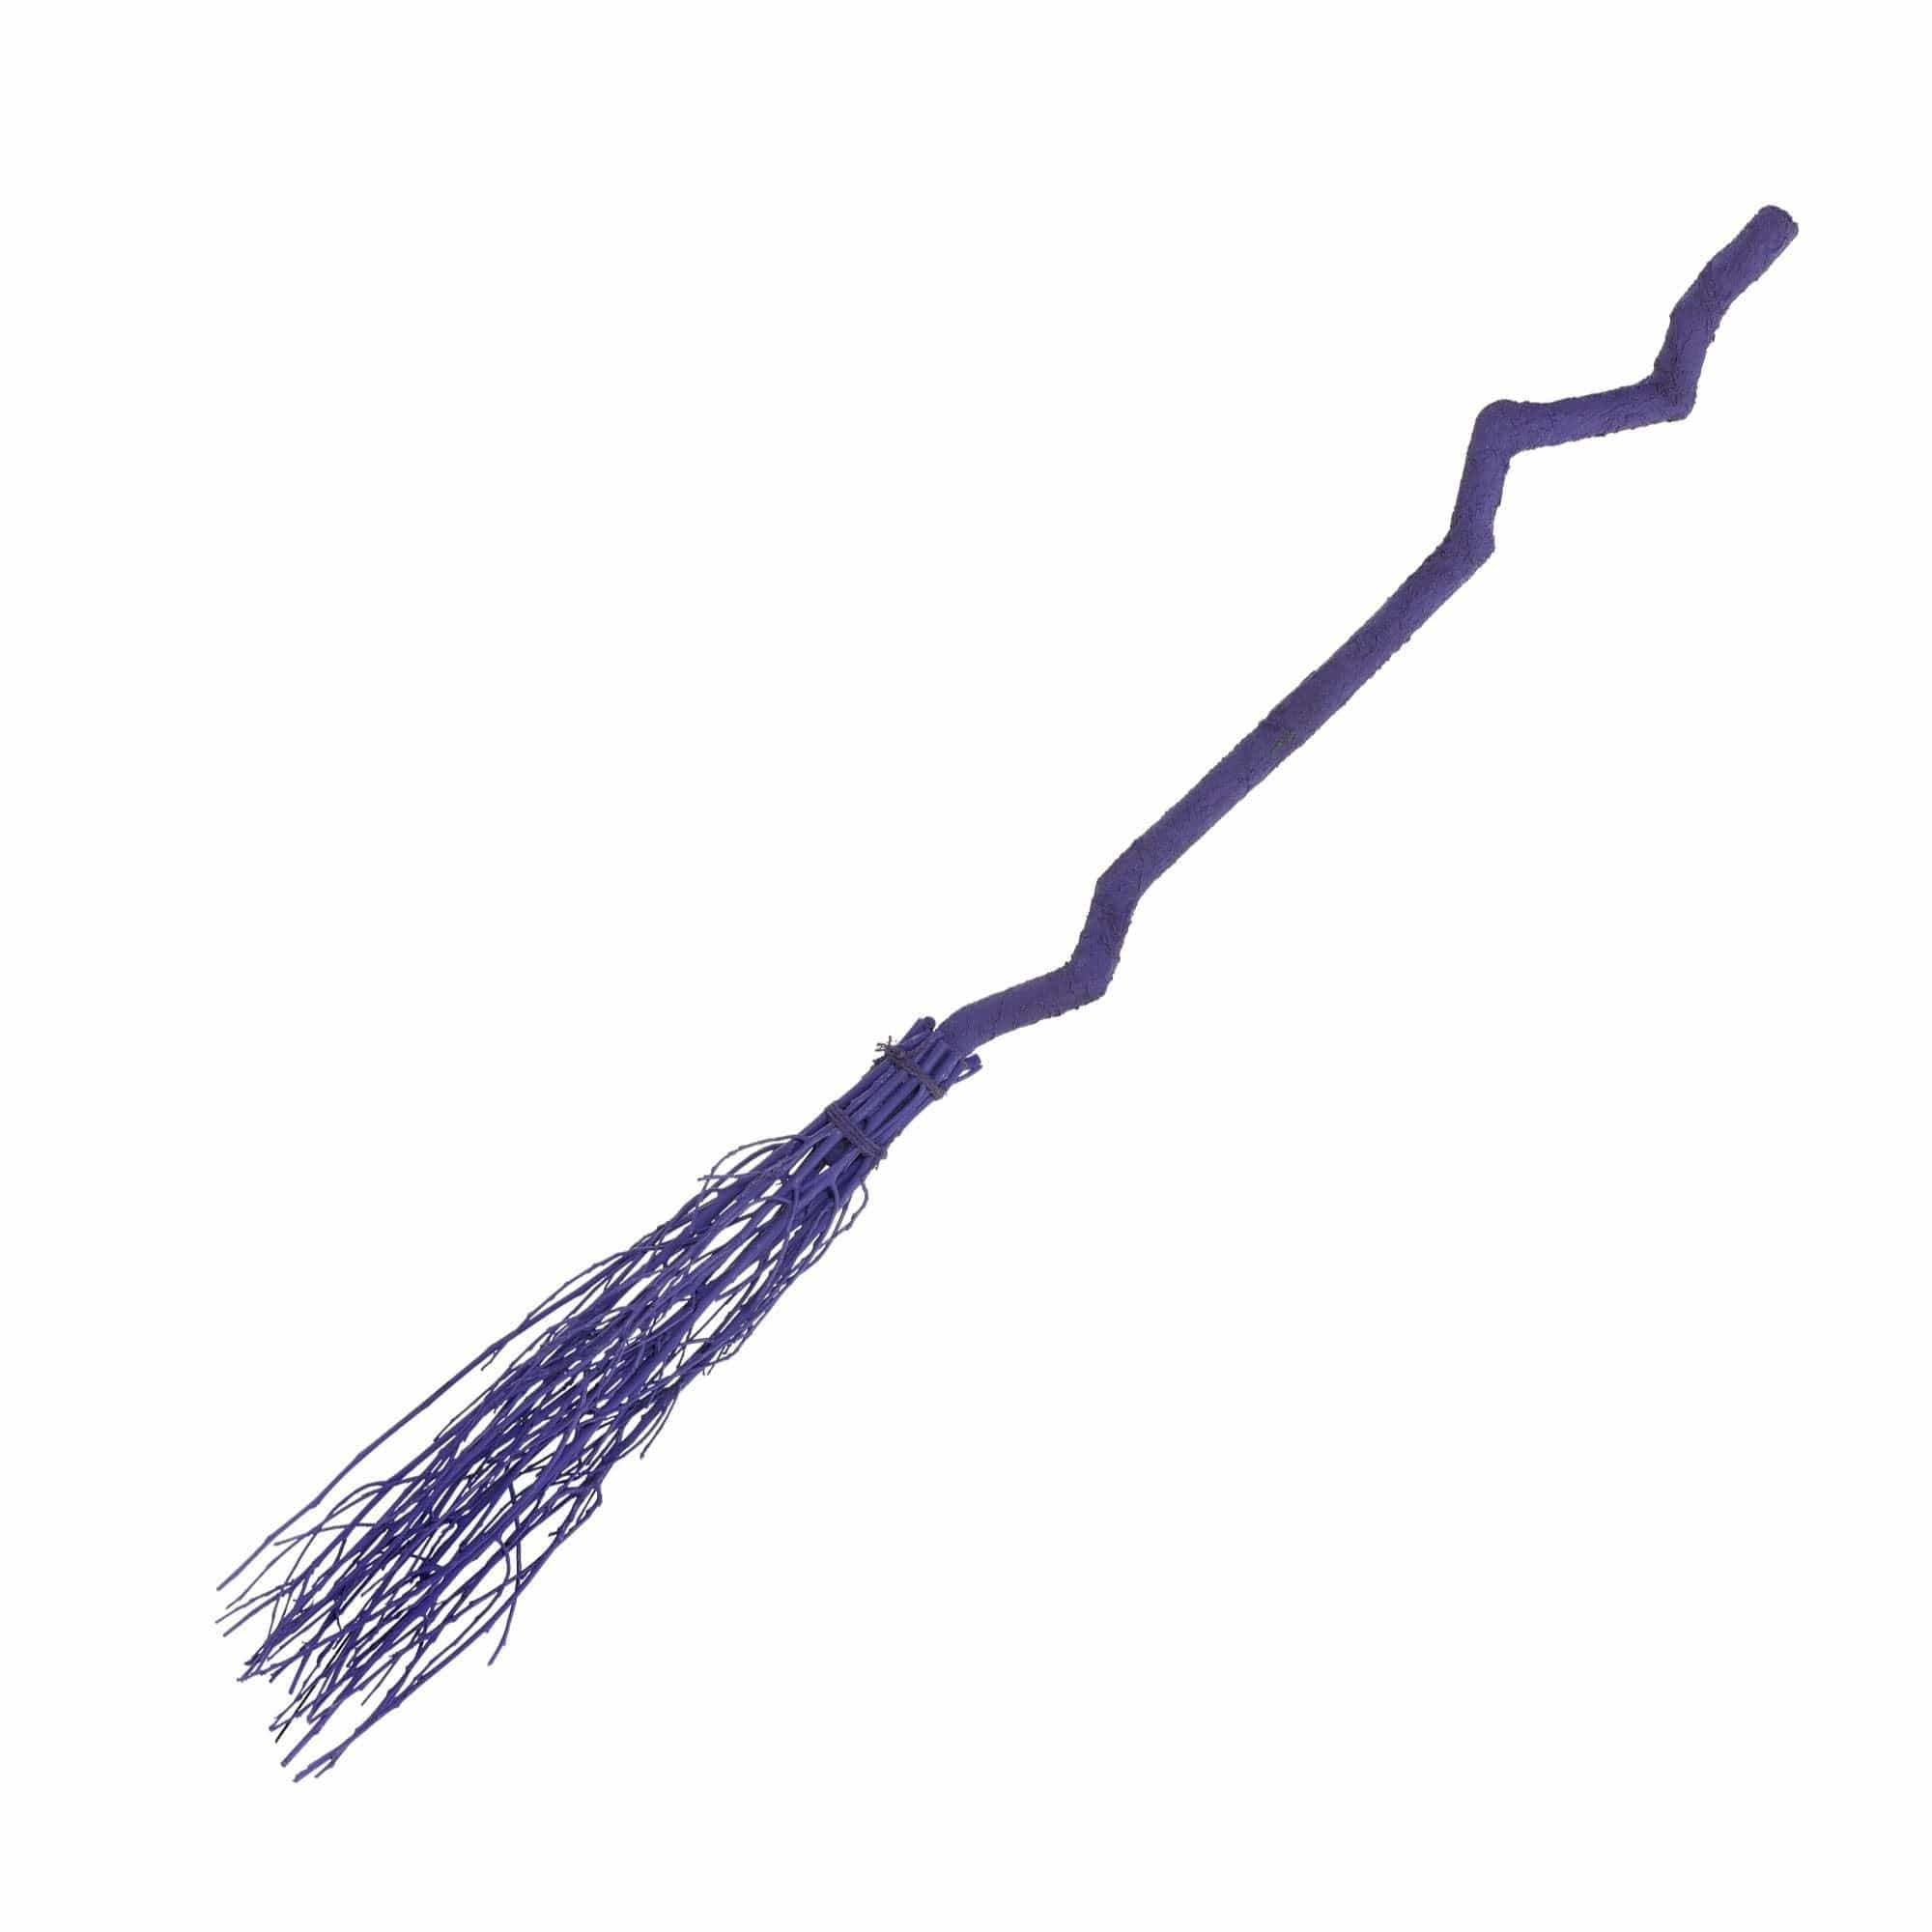 Amscan COSTUMES: ACCESSORIES Crooked Broom - Purple